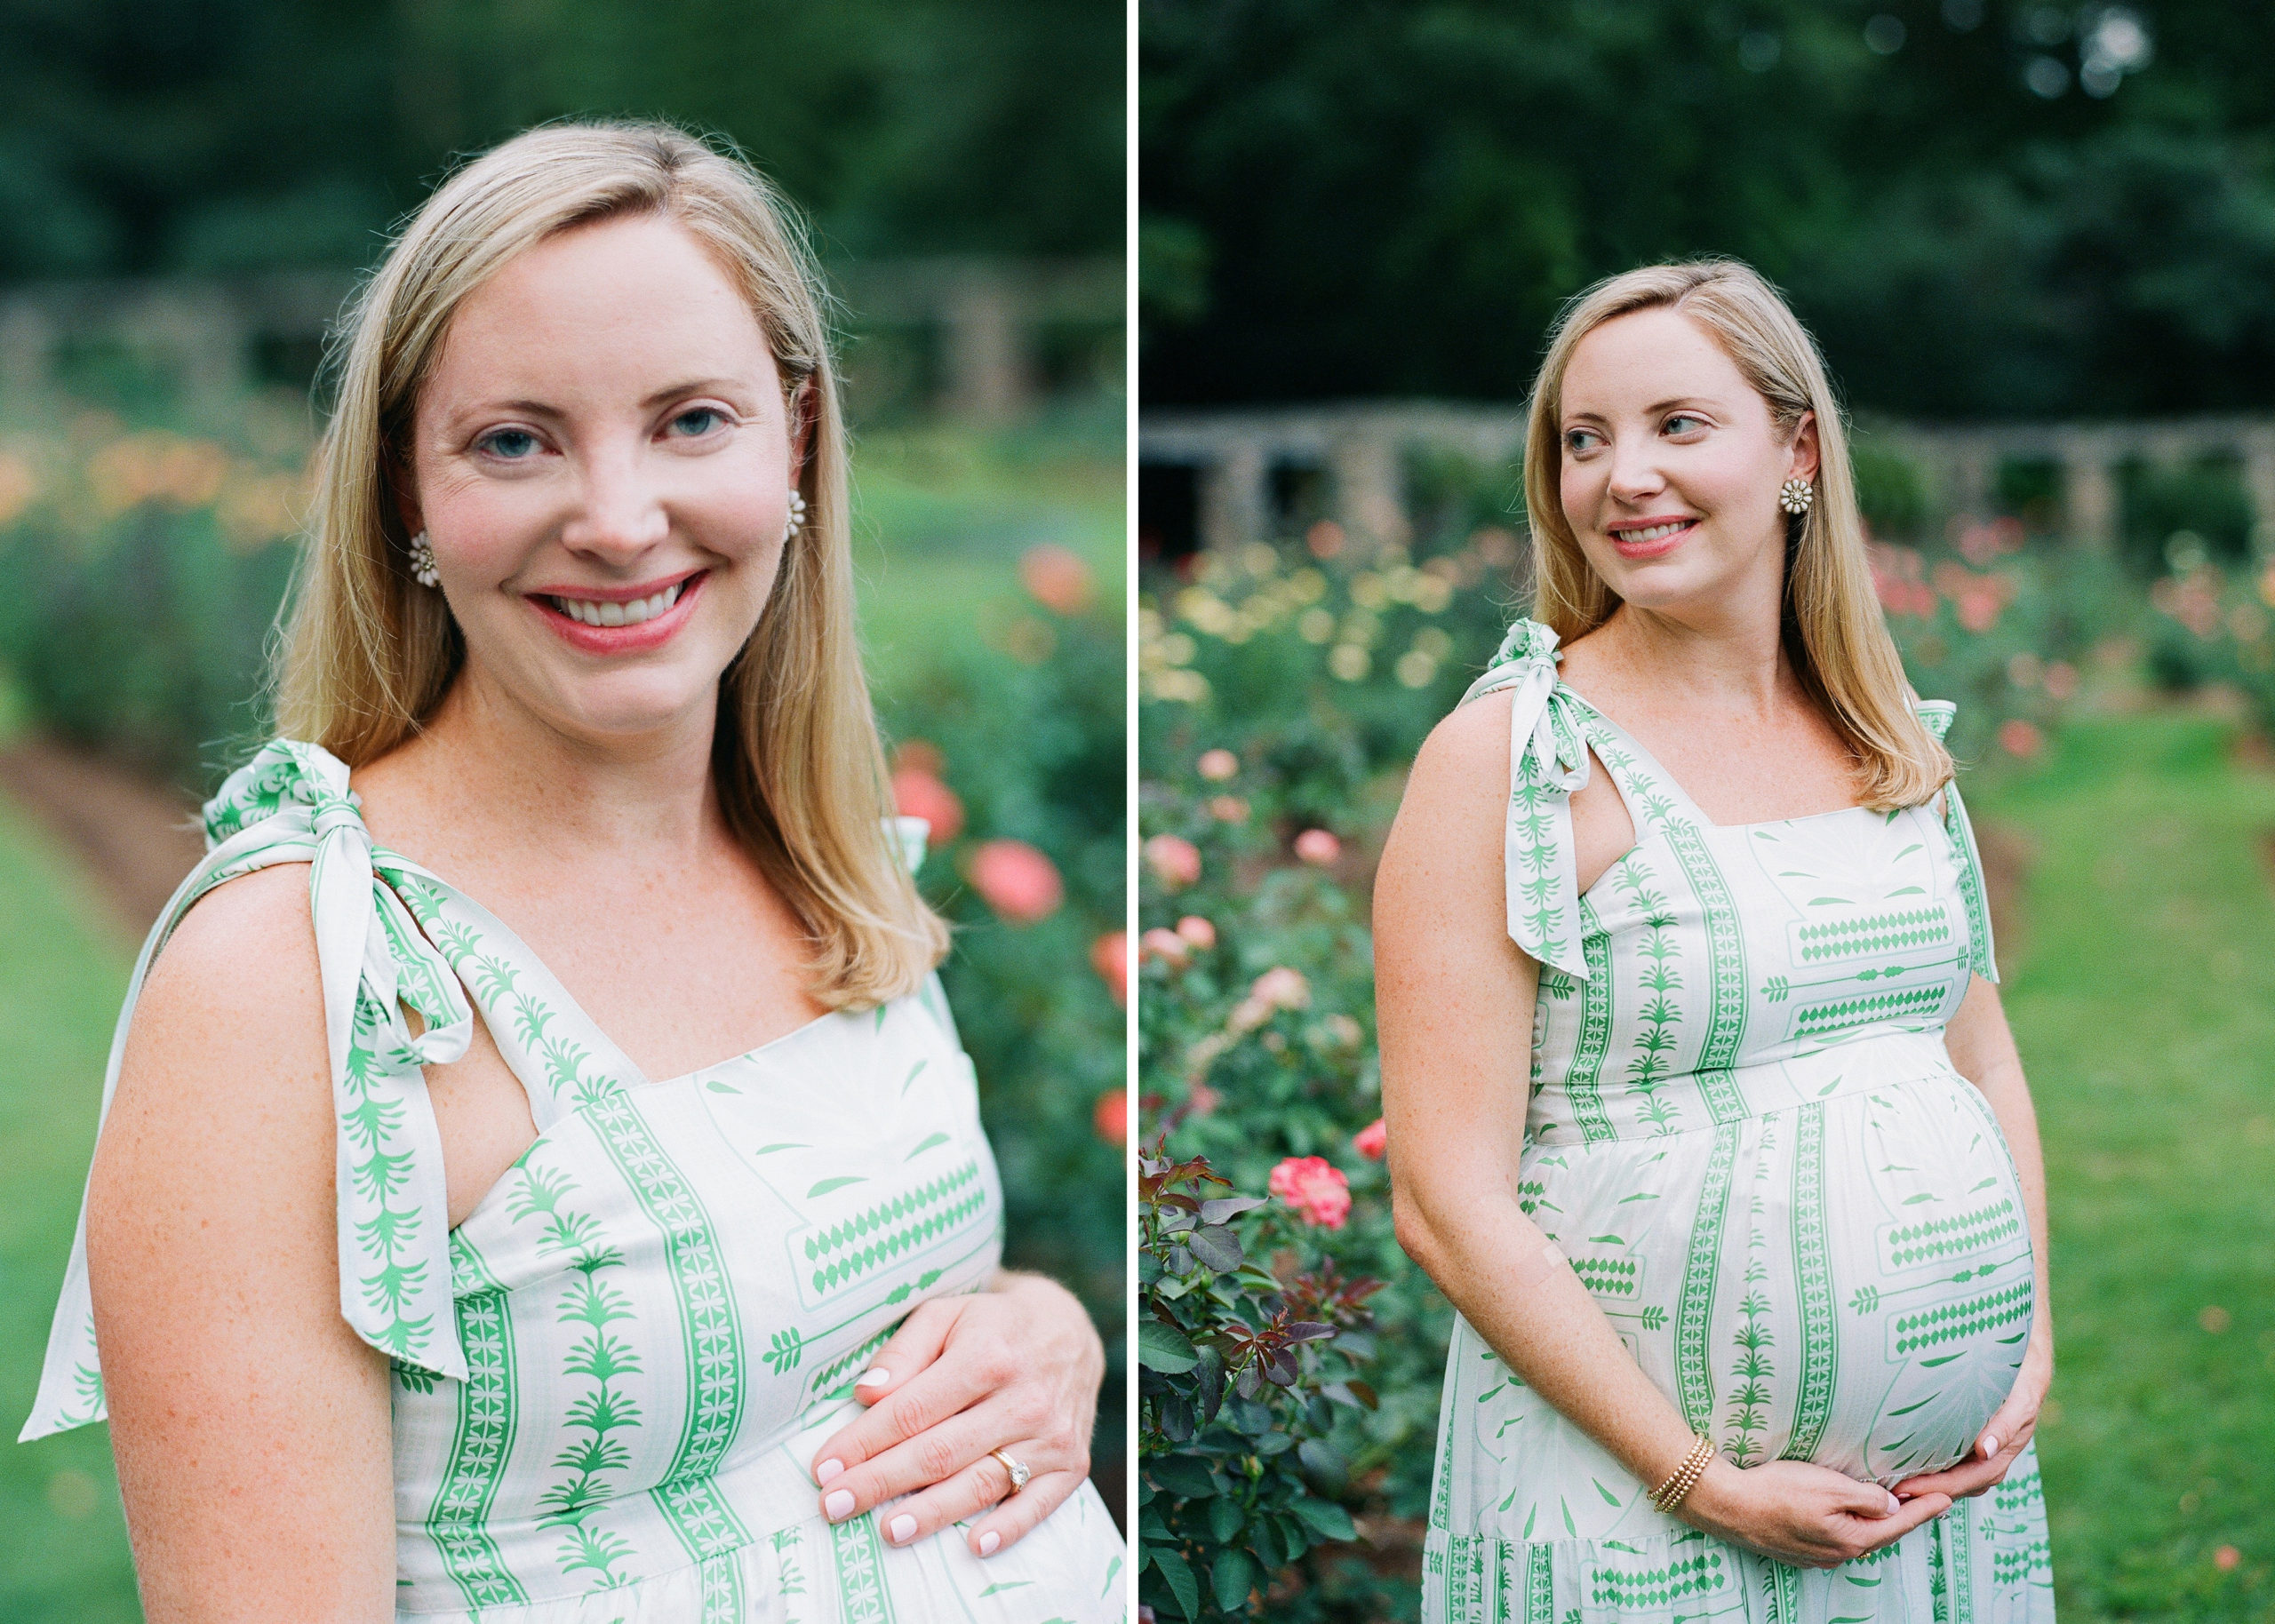 Raleigh rose garden maternity photography session